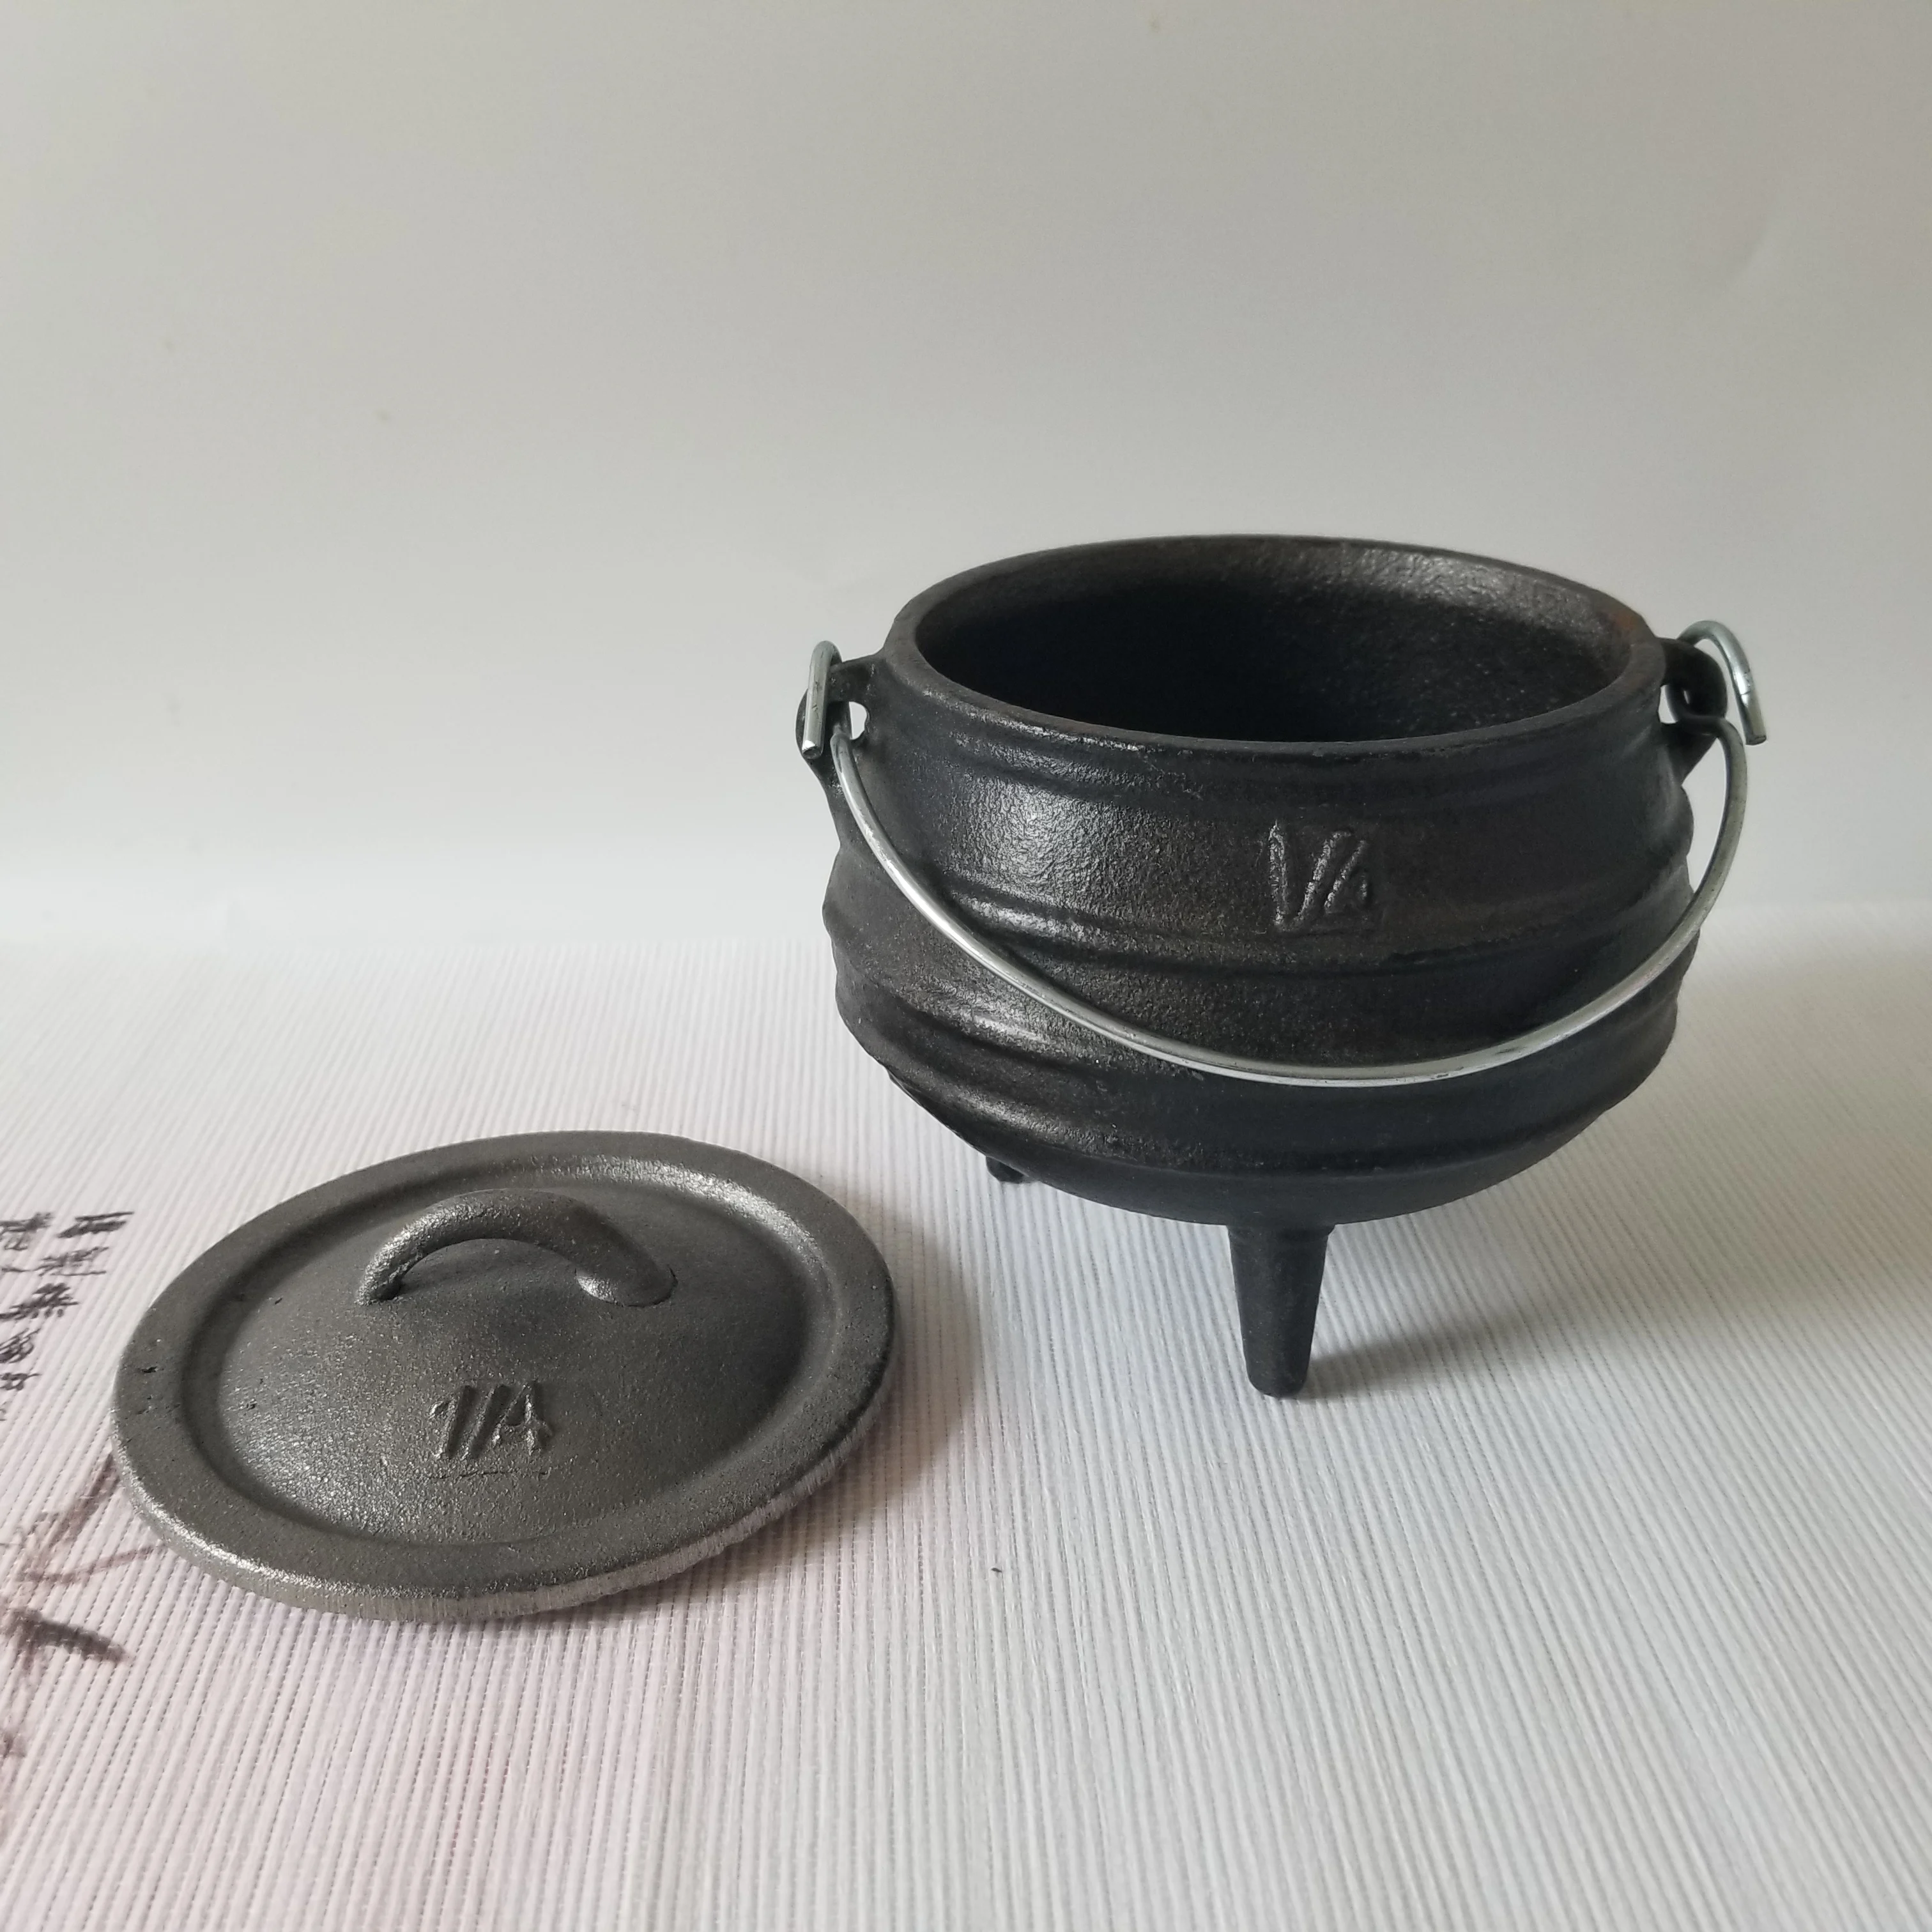 https://ae01.alicdn.com/kf/H21dffc8431544951a483dc215592494df/1-4-Cast-Iron-Cauldron-Magic-Pot-Cooking-Potjie-Perfect-for-Incense-Smudge-Kit-Sage-Holder.jpg